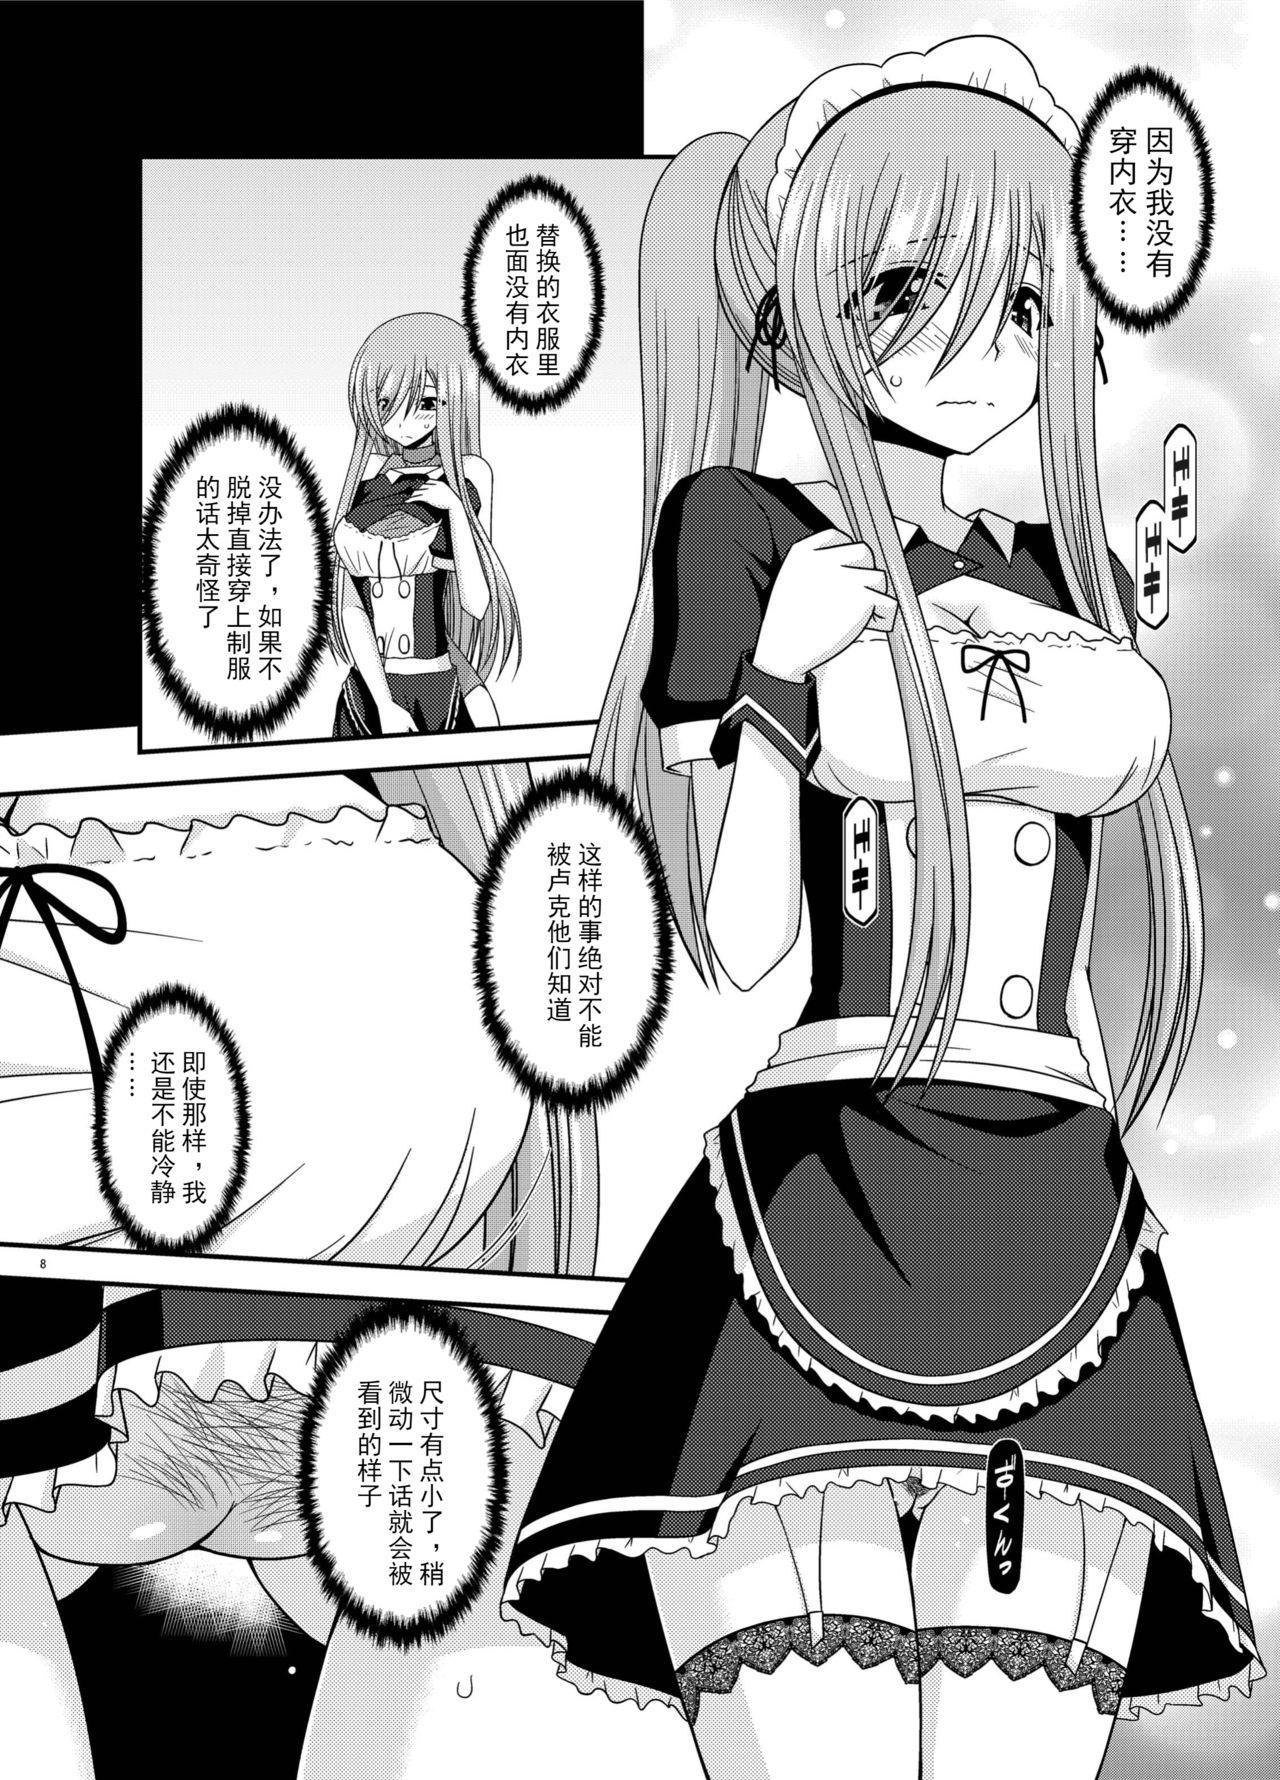 Blowing Melon ga Chou Shindou! R13 - Tales of the abyss Moneytalks - Page 8